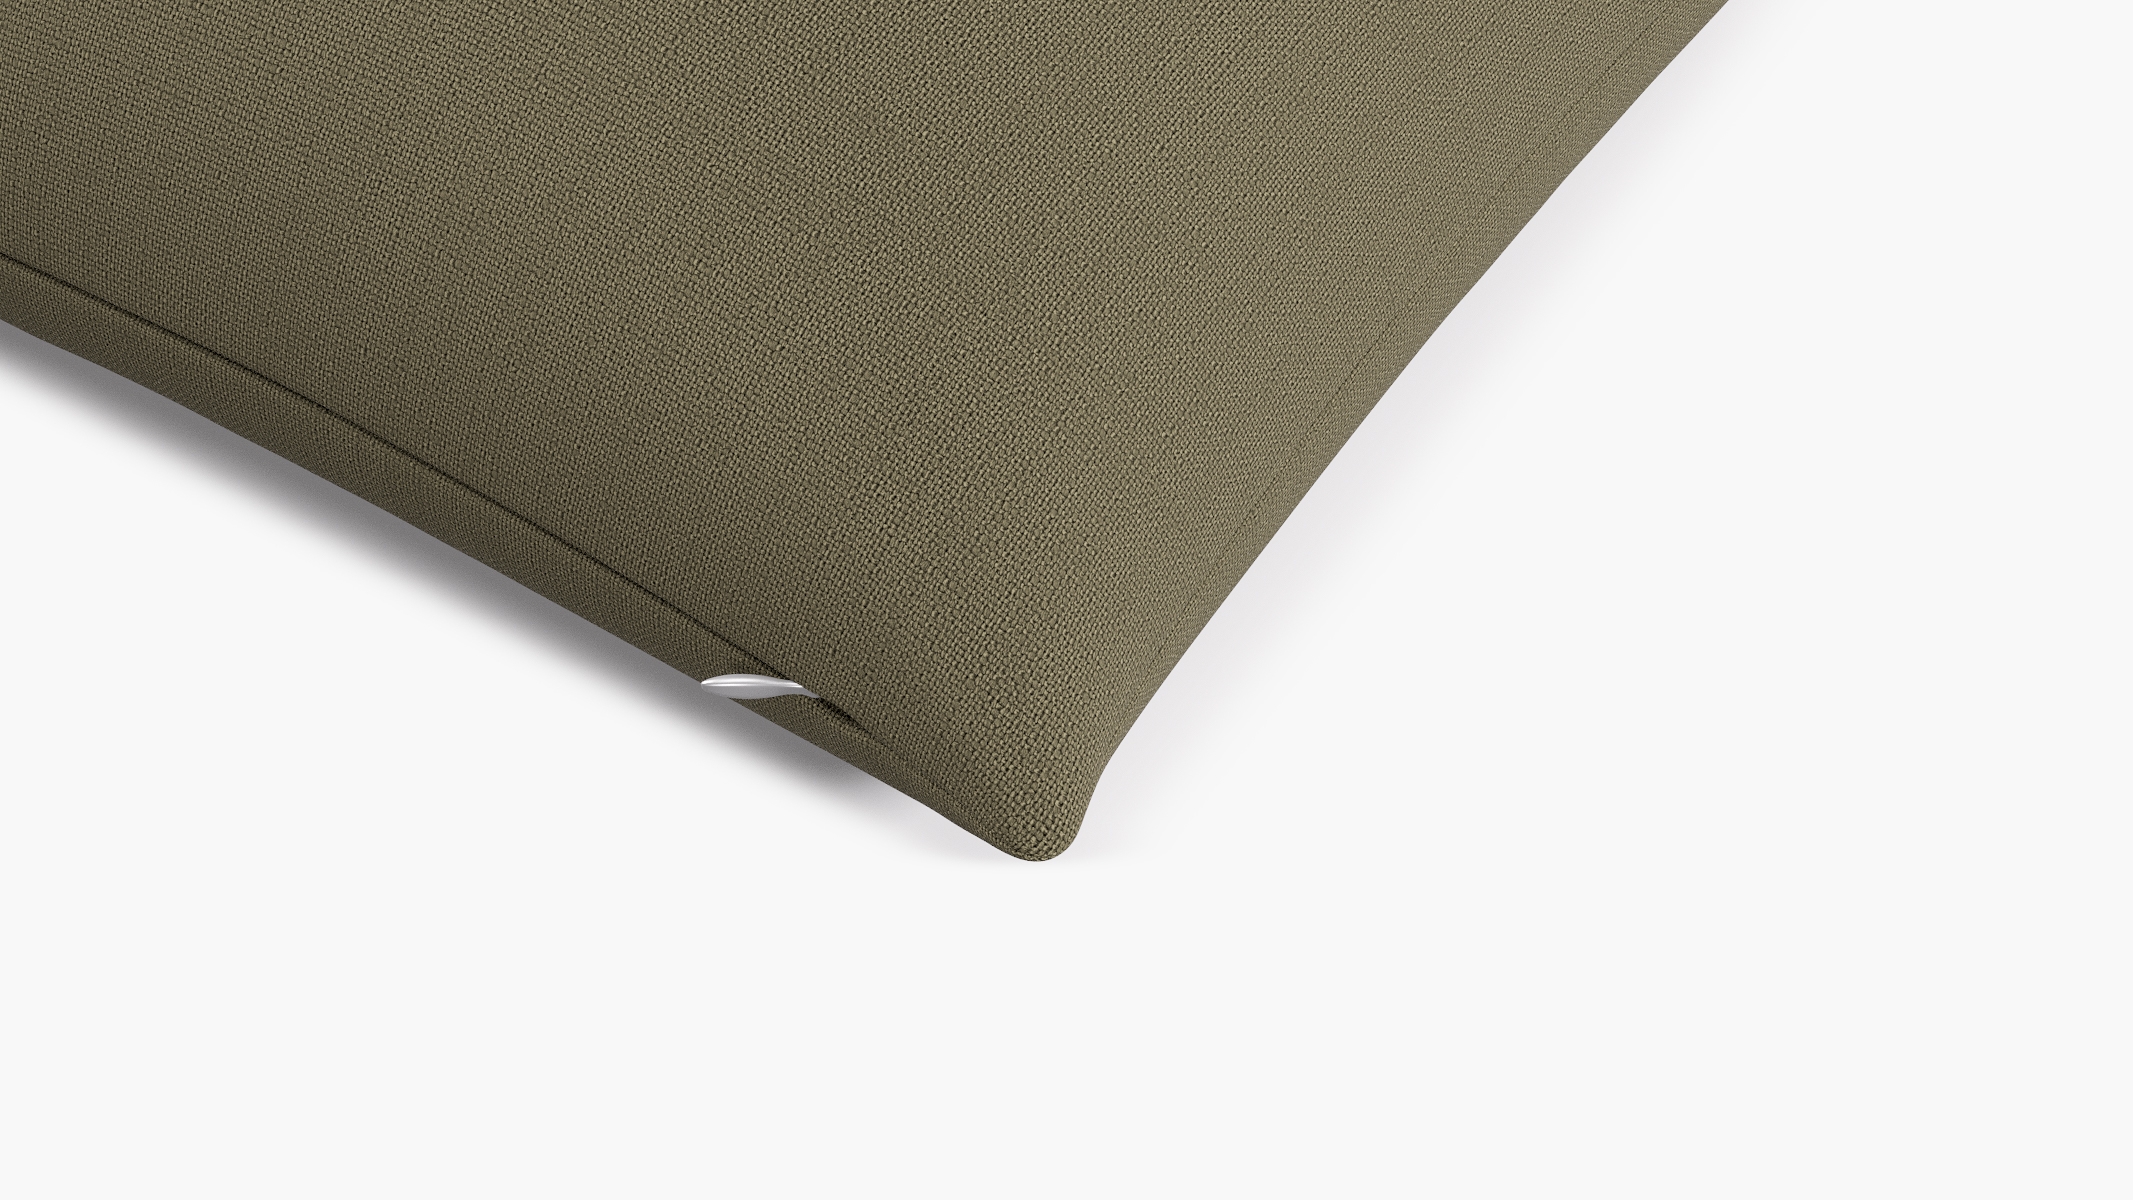 Olive Linen Throw Pillow - 20" x 20" - Image 1